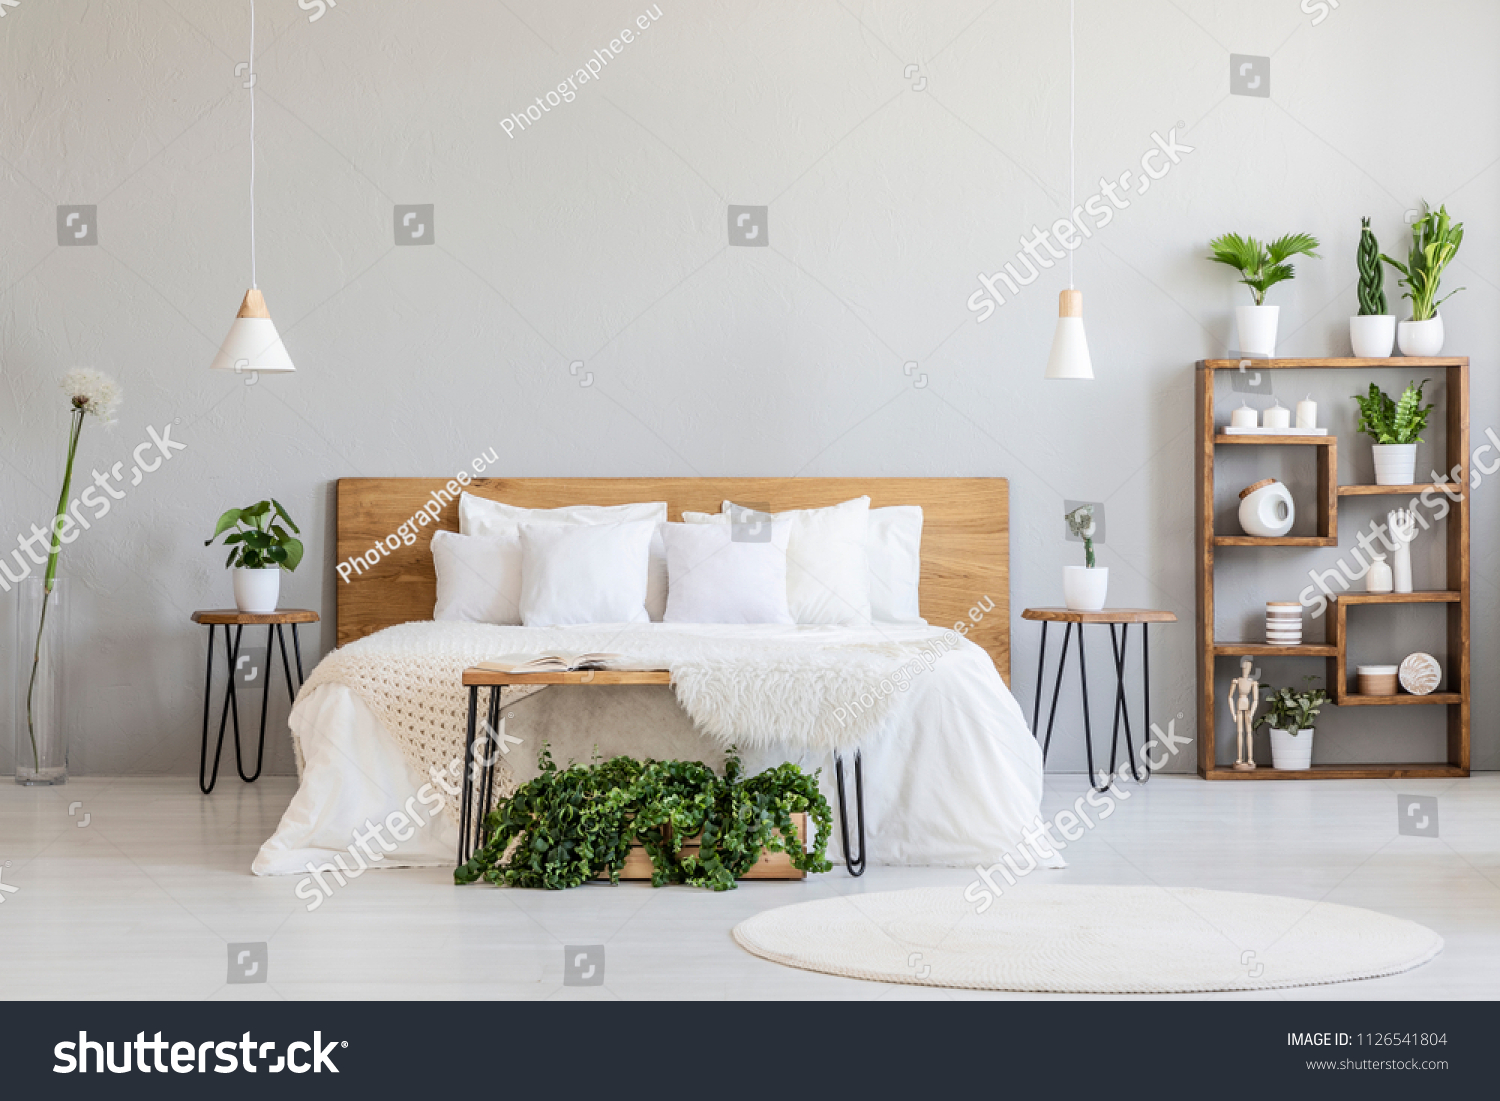 White pillows on wooden bed in minimal bedroom interior with plants and round rug. Real photo #1126541804